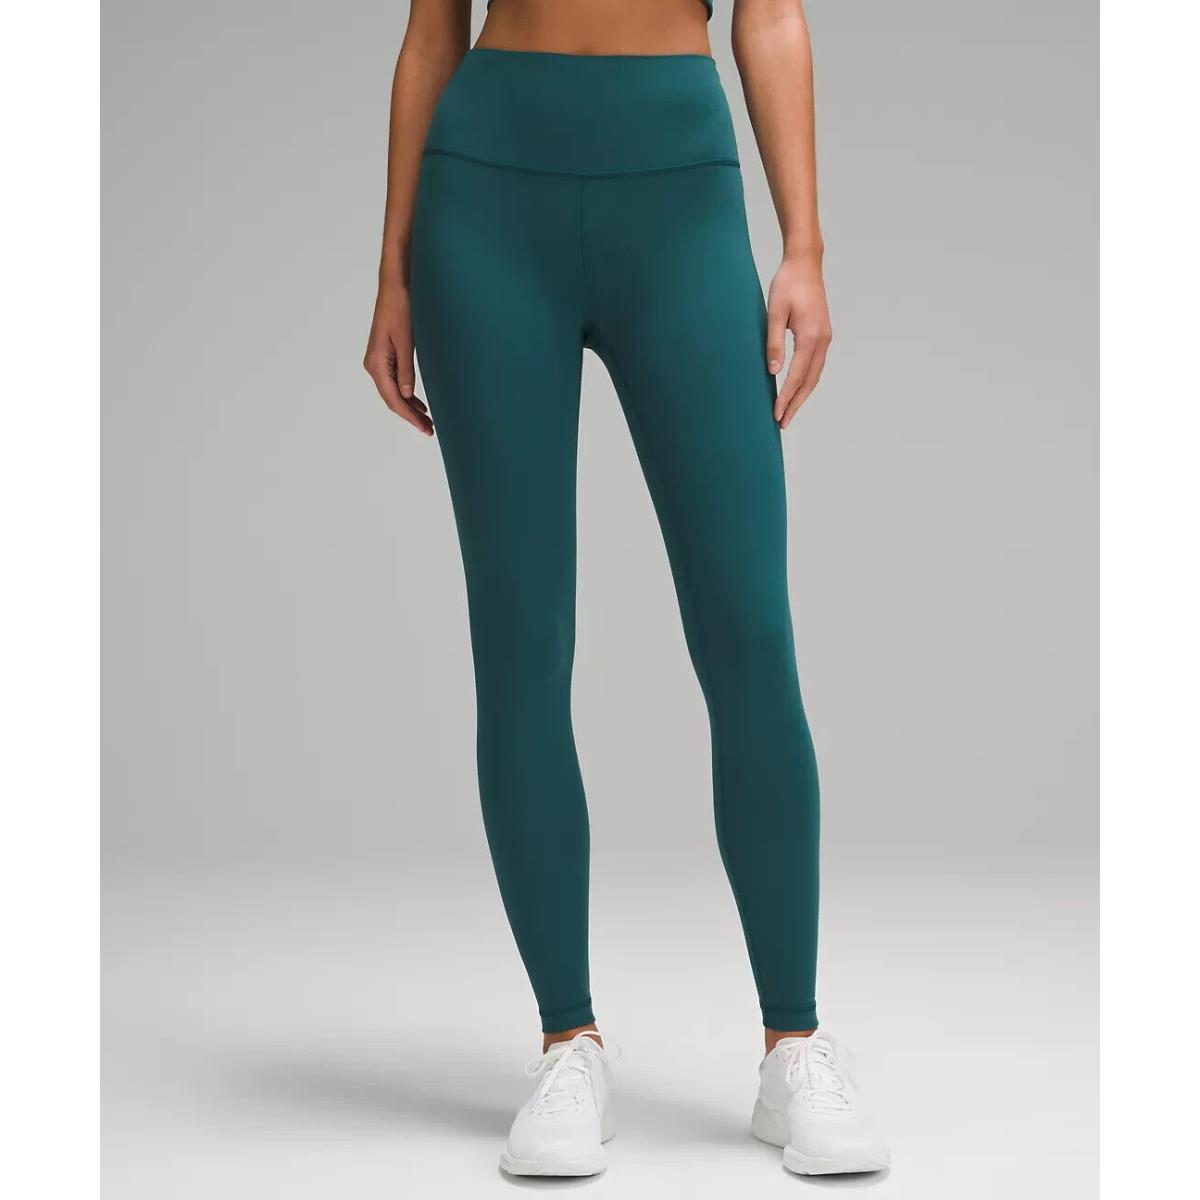 Lululemon Wunder Train High-rise Tight 28 Storm Teal Size 0